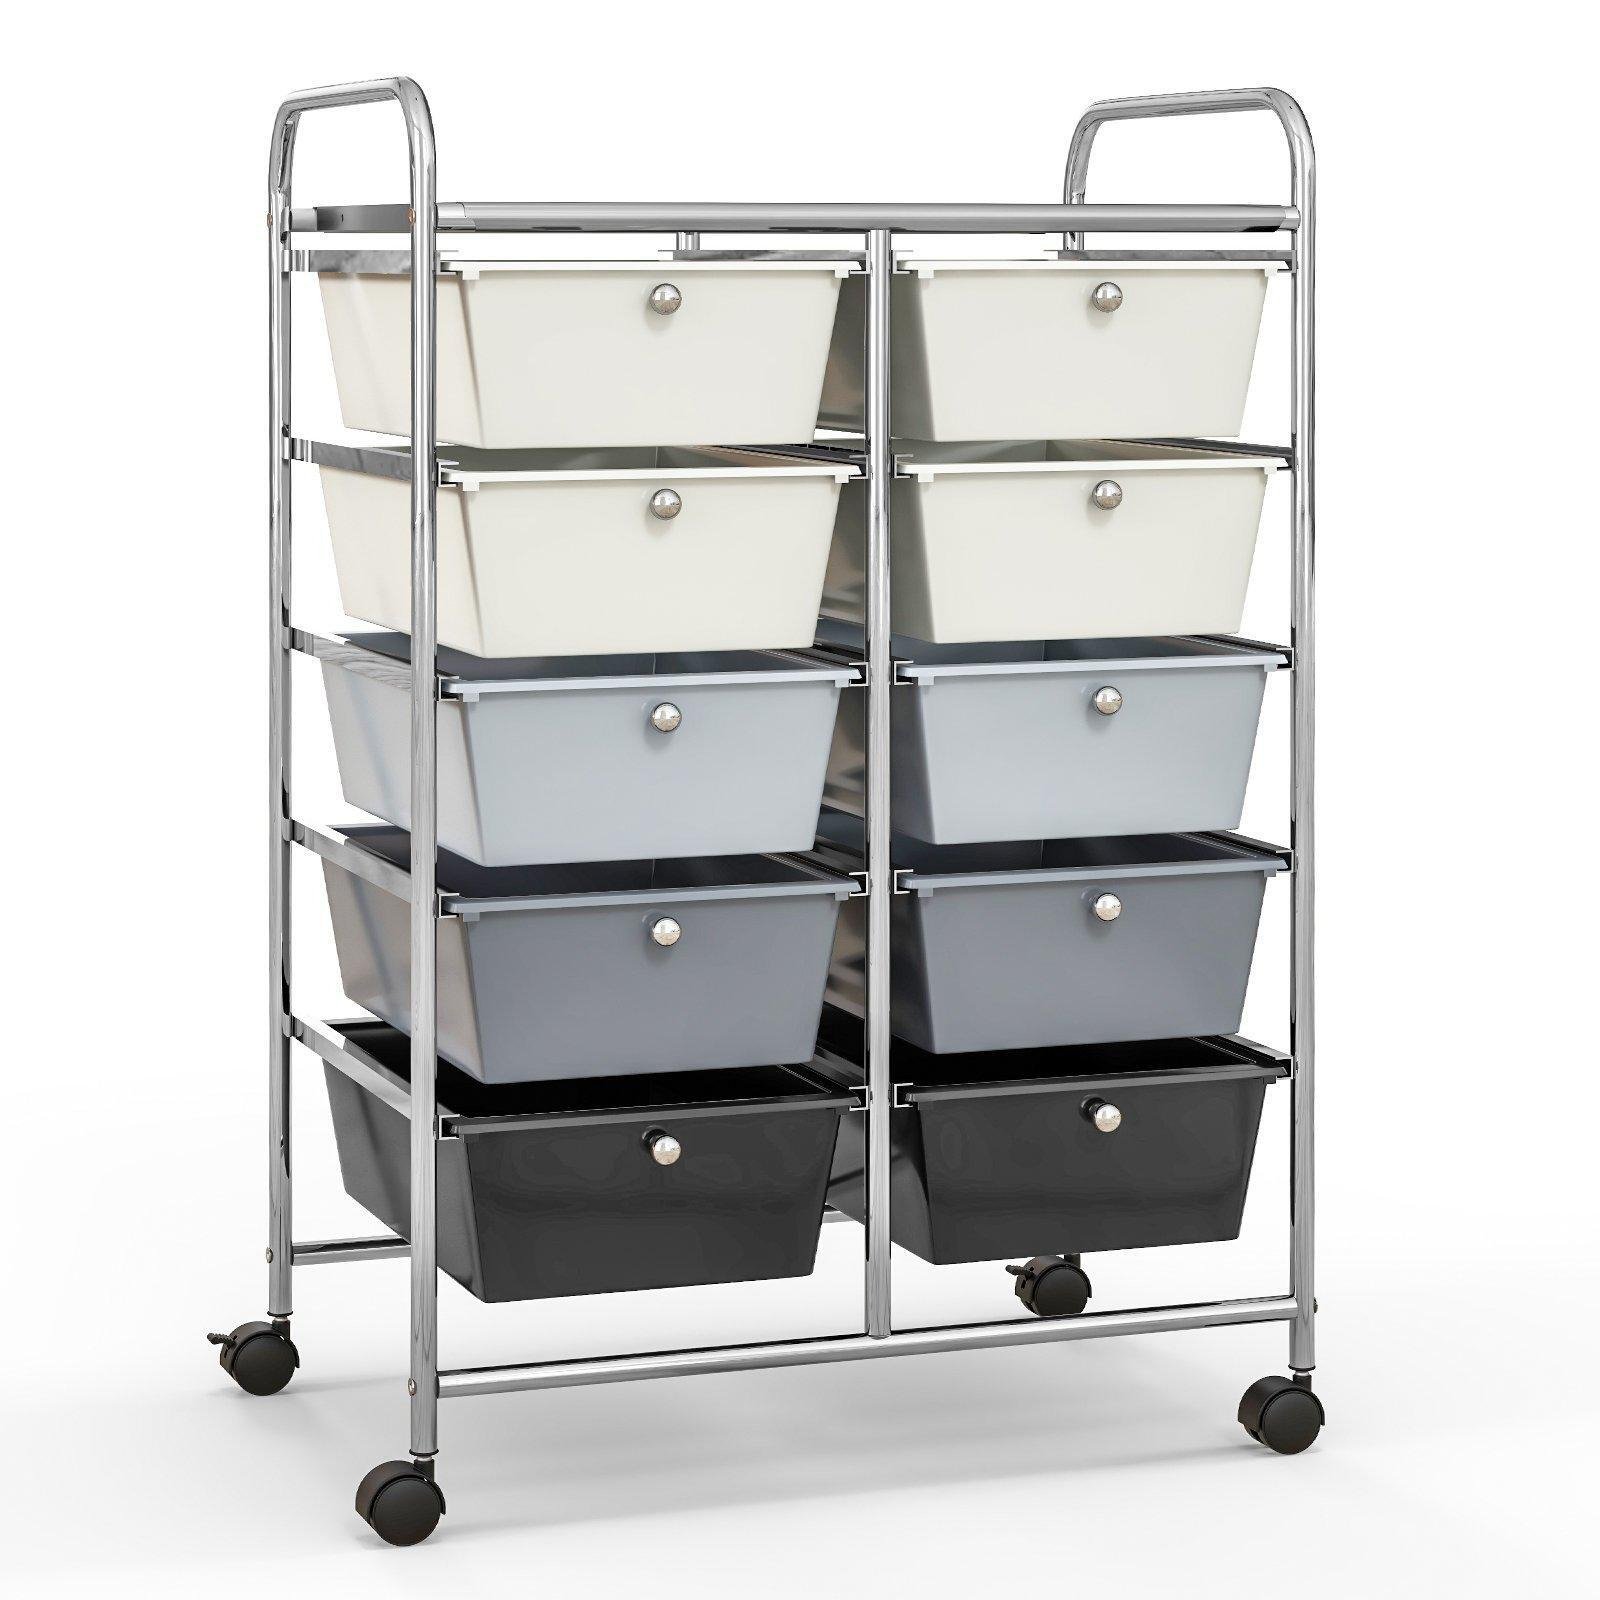 10 Drawers Storage Trolley Mobile Rolling Utility Cart Home Office Organizer - image 1